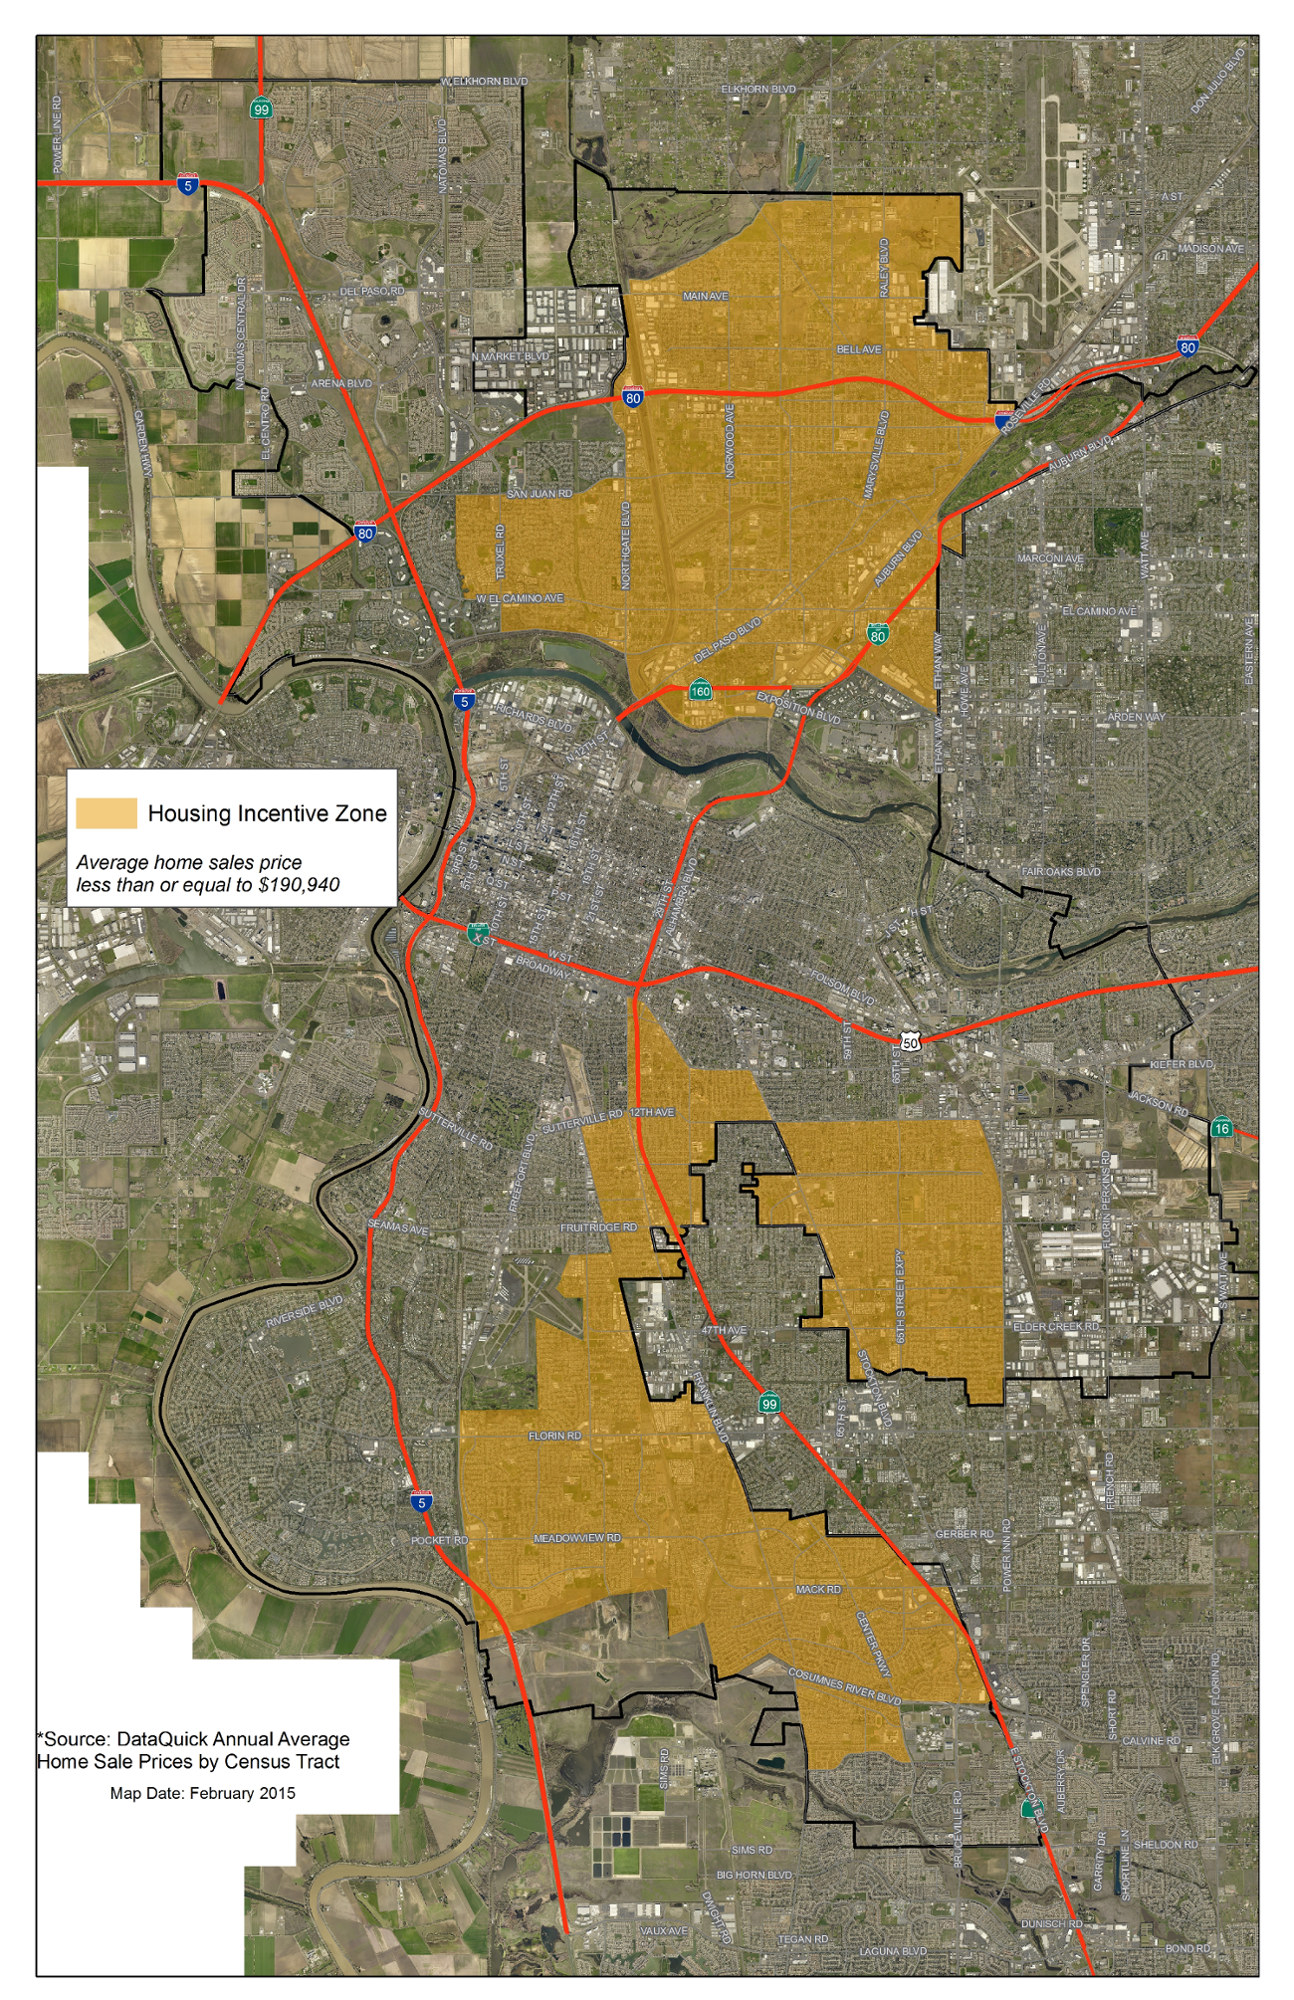 map of Sacramento showing properties marked as housing incentive zones